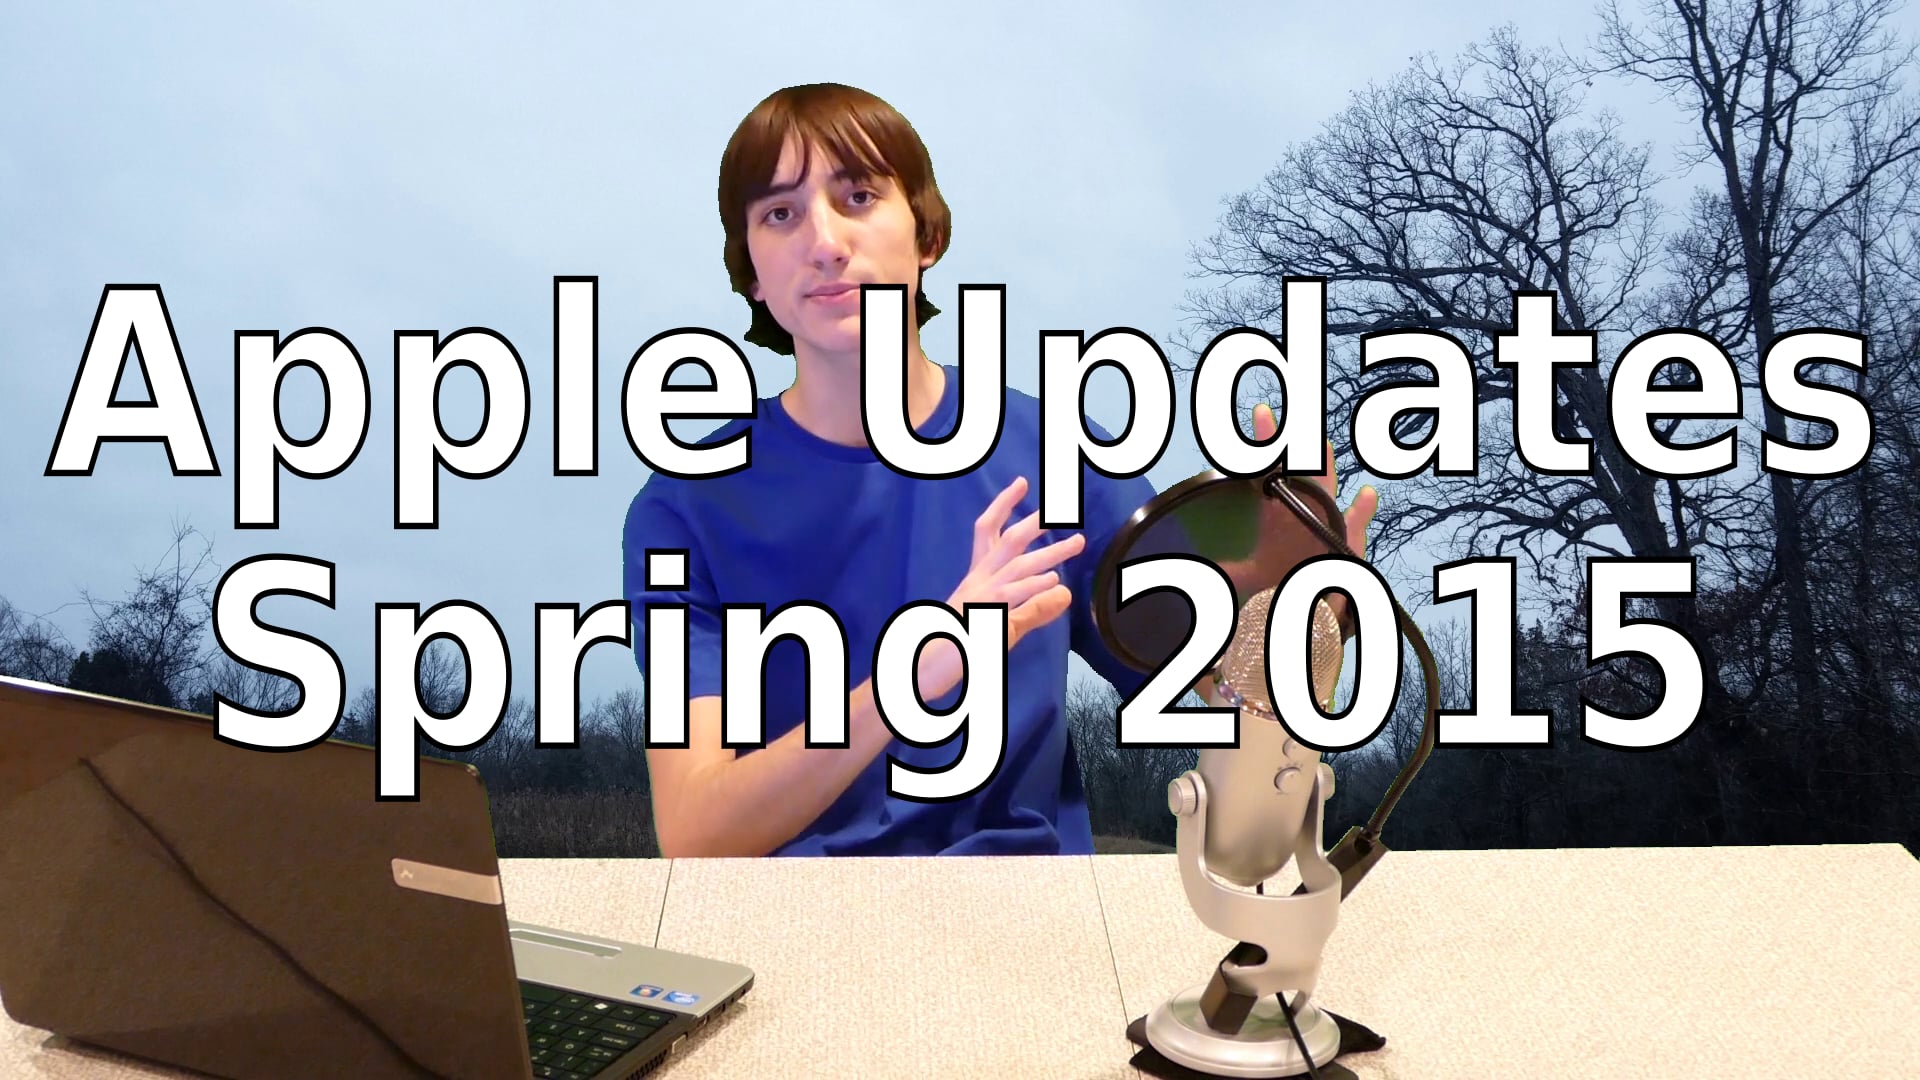 Apple Announcements - Spring 2015